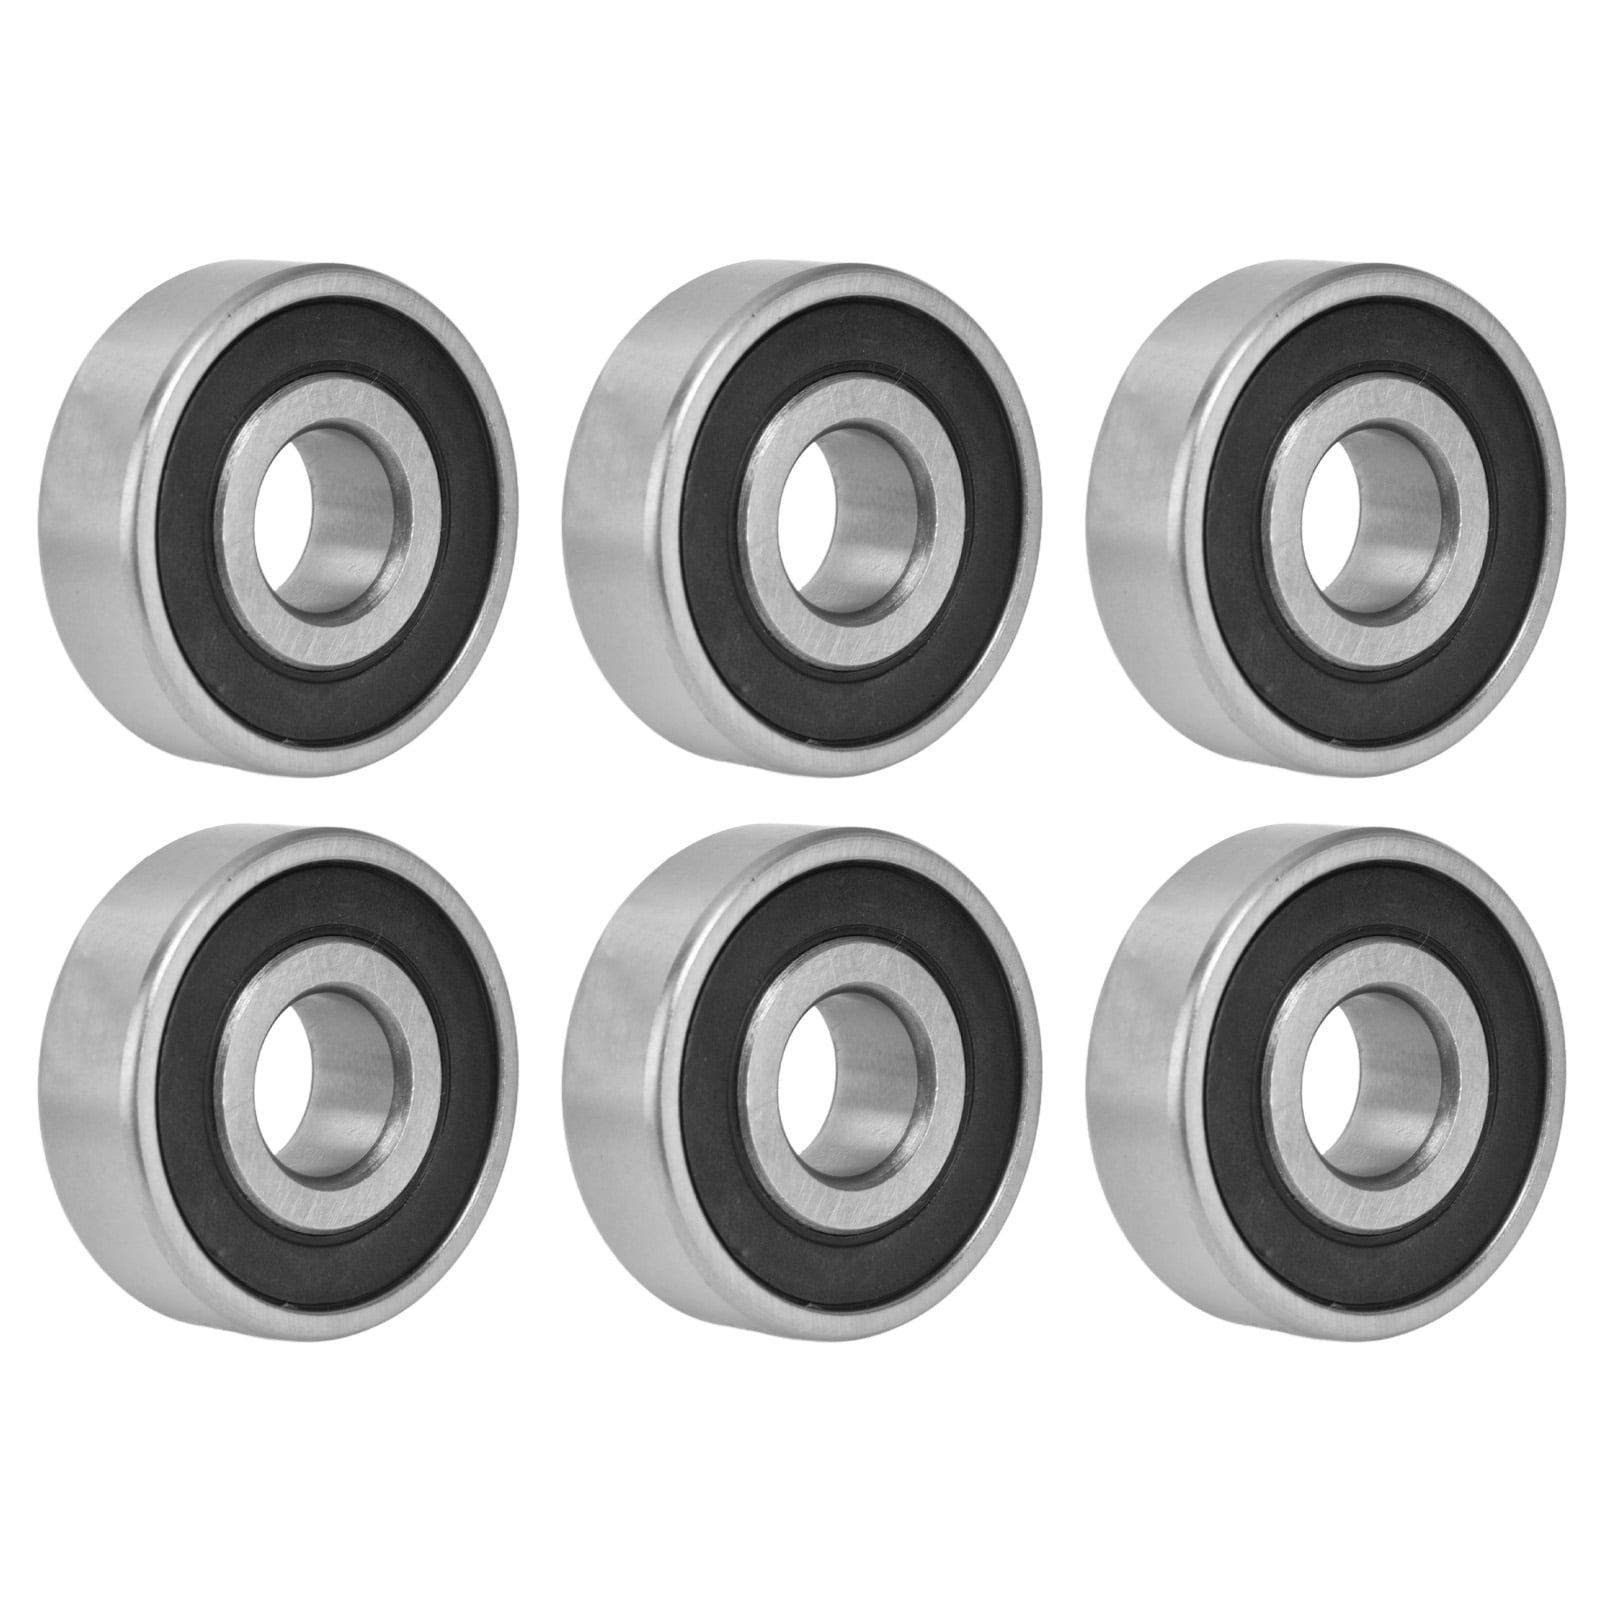 QUICK SHIPPING AXLE BEARING FOR ARIENS LAWN MOWERS REPLACES # 05416000 